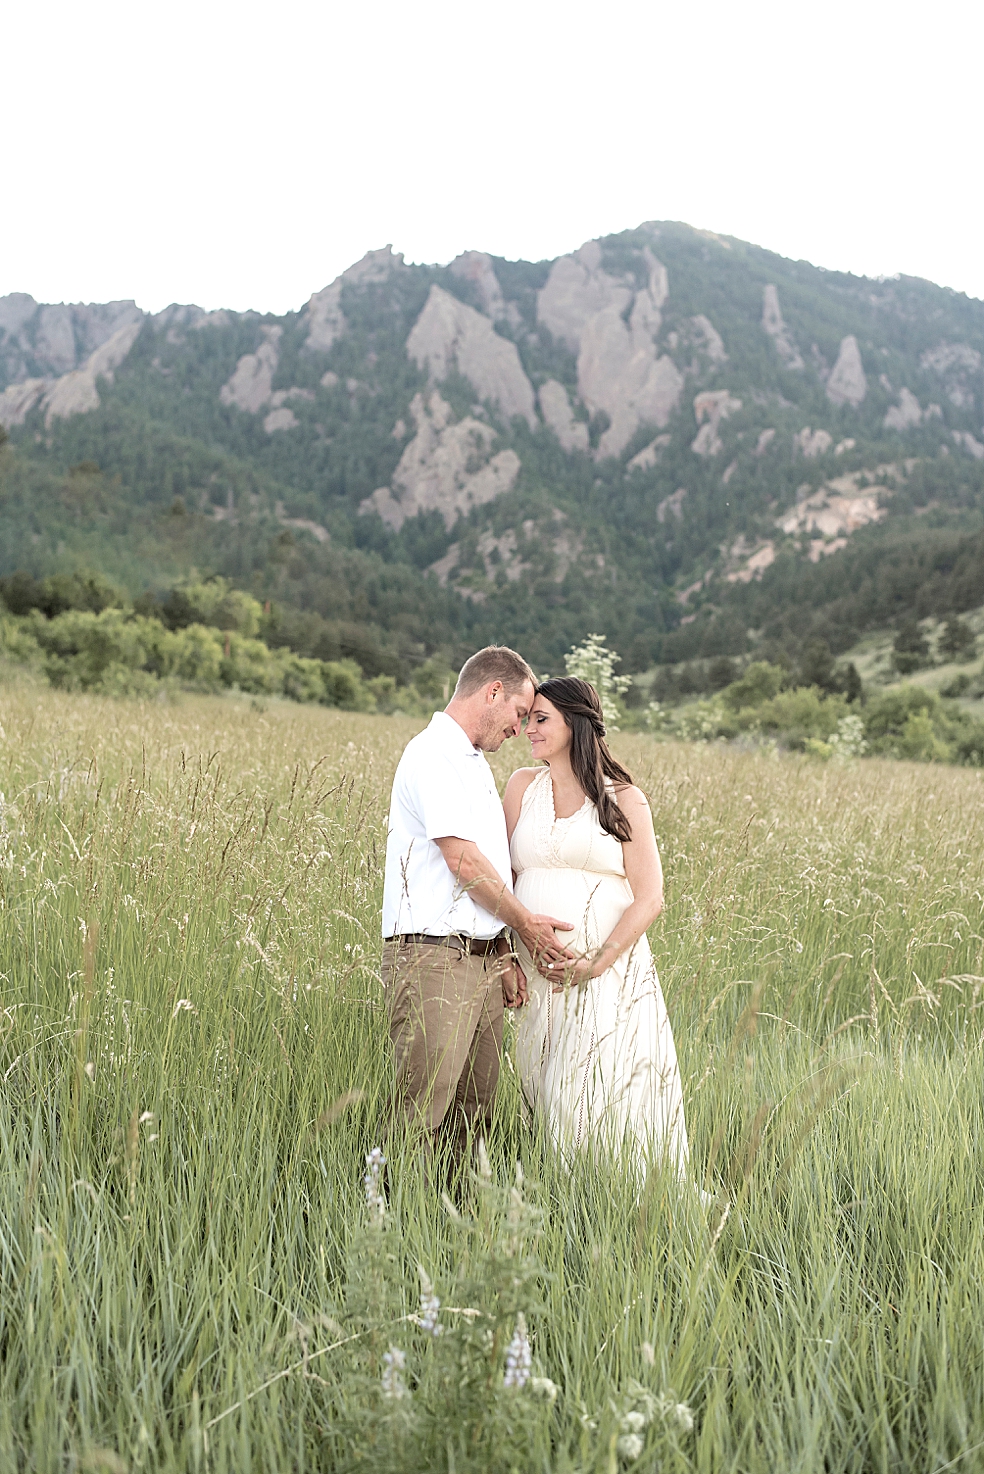 Mom and dad to be in a field snuggling | Photo by Jessica Lee Photography